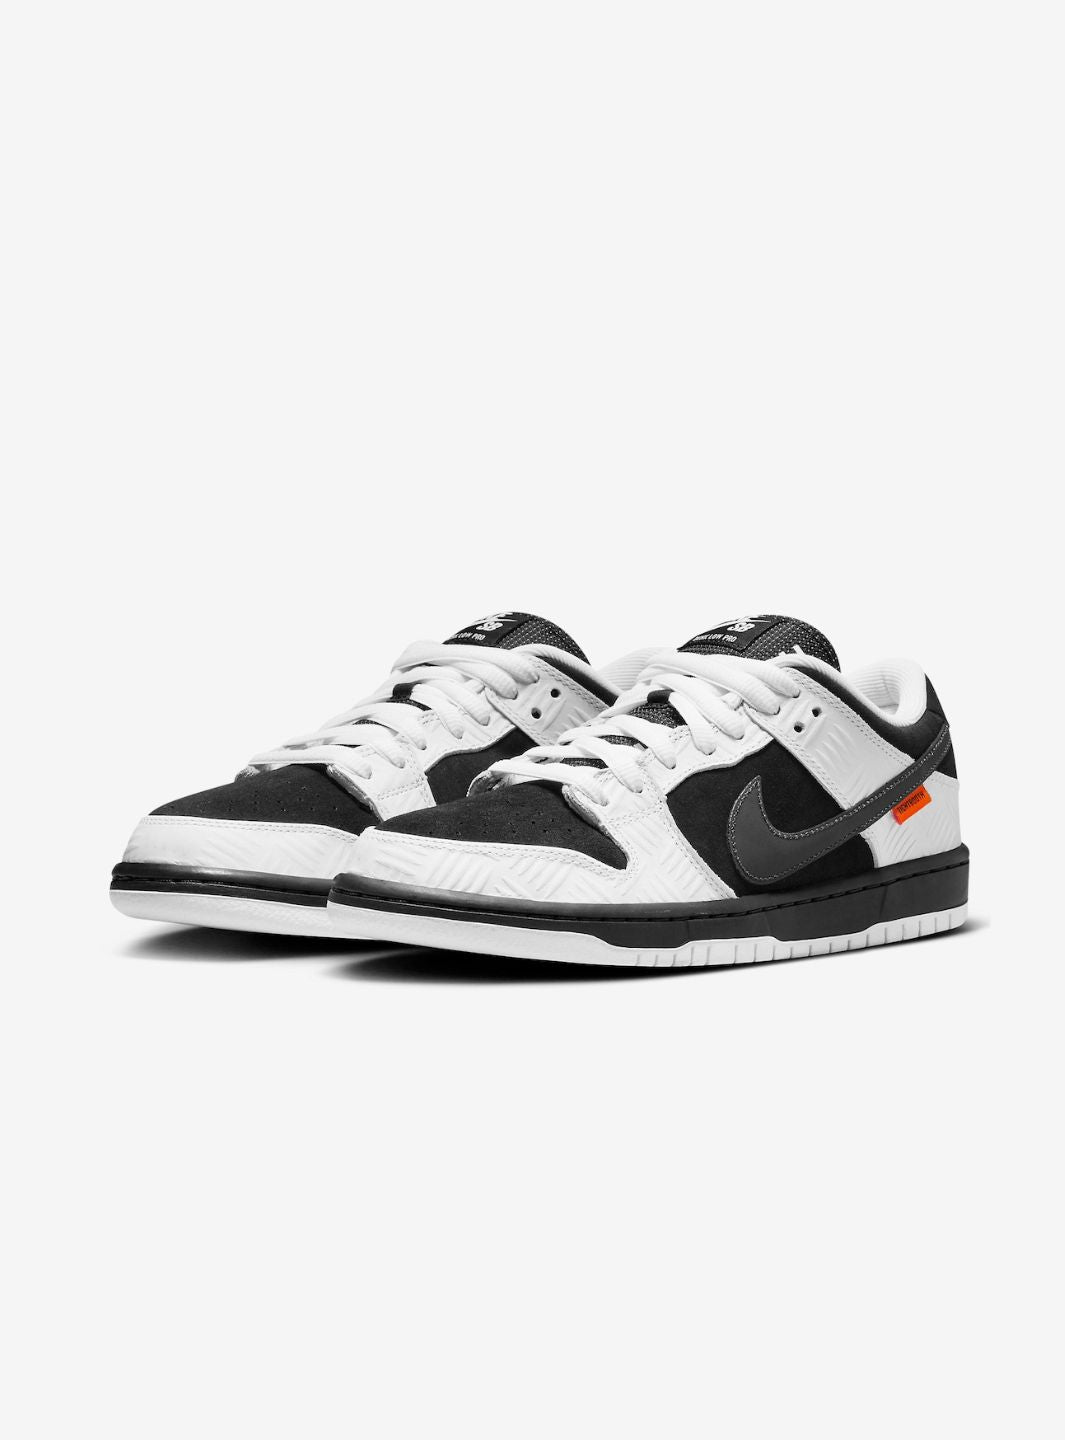 Nike SB Dunk Low TIGHTBOOTH - FD2629-100 | ResellZone